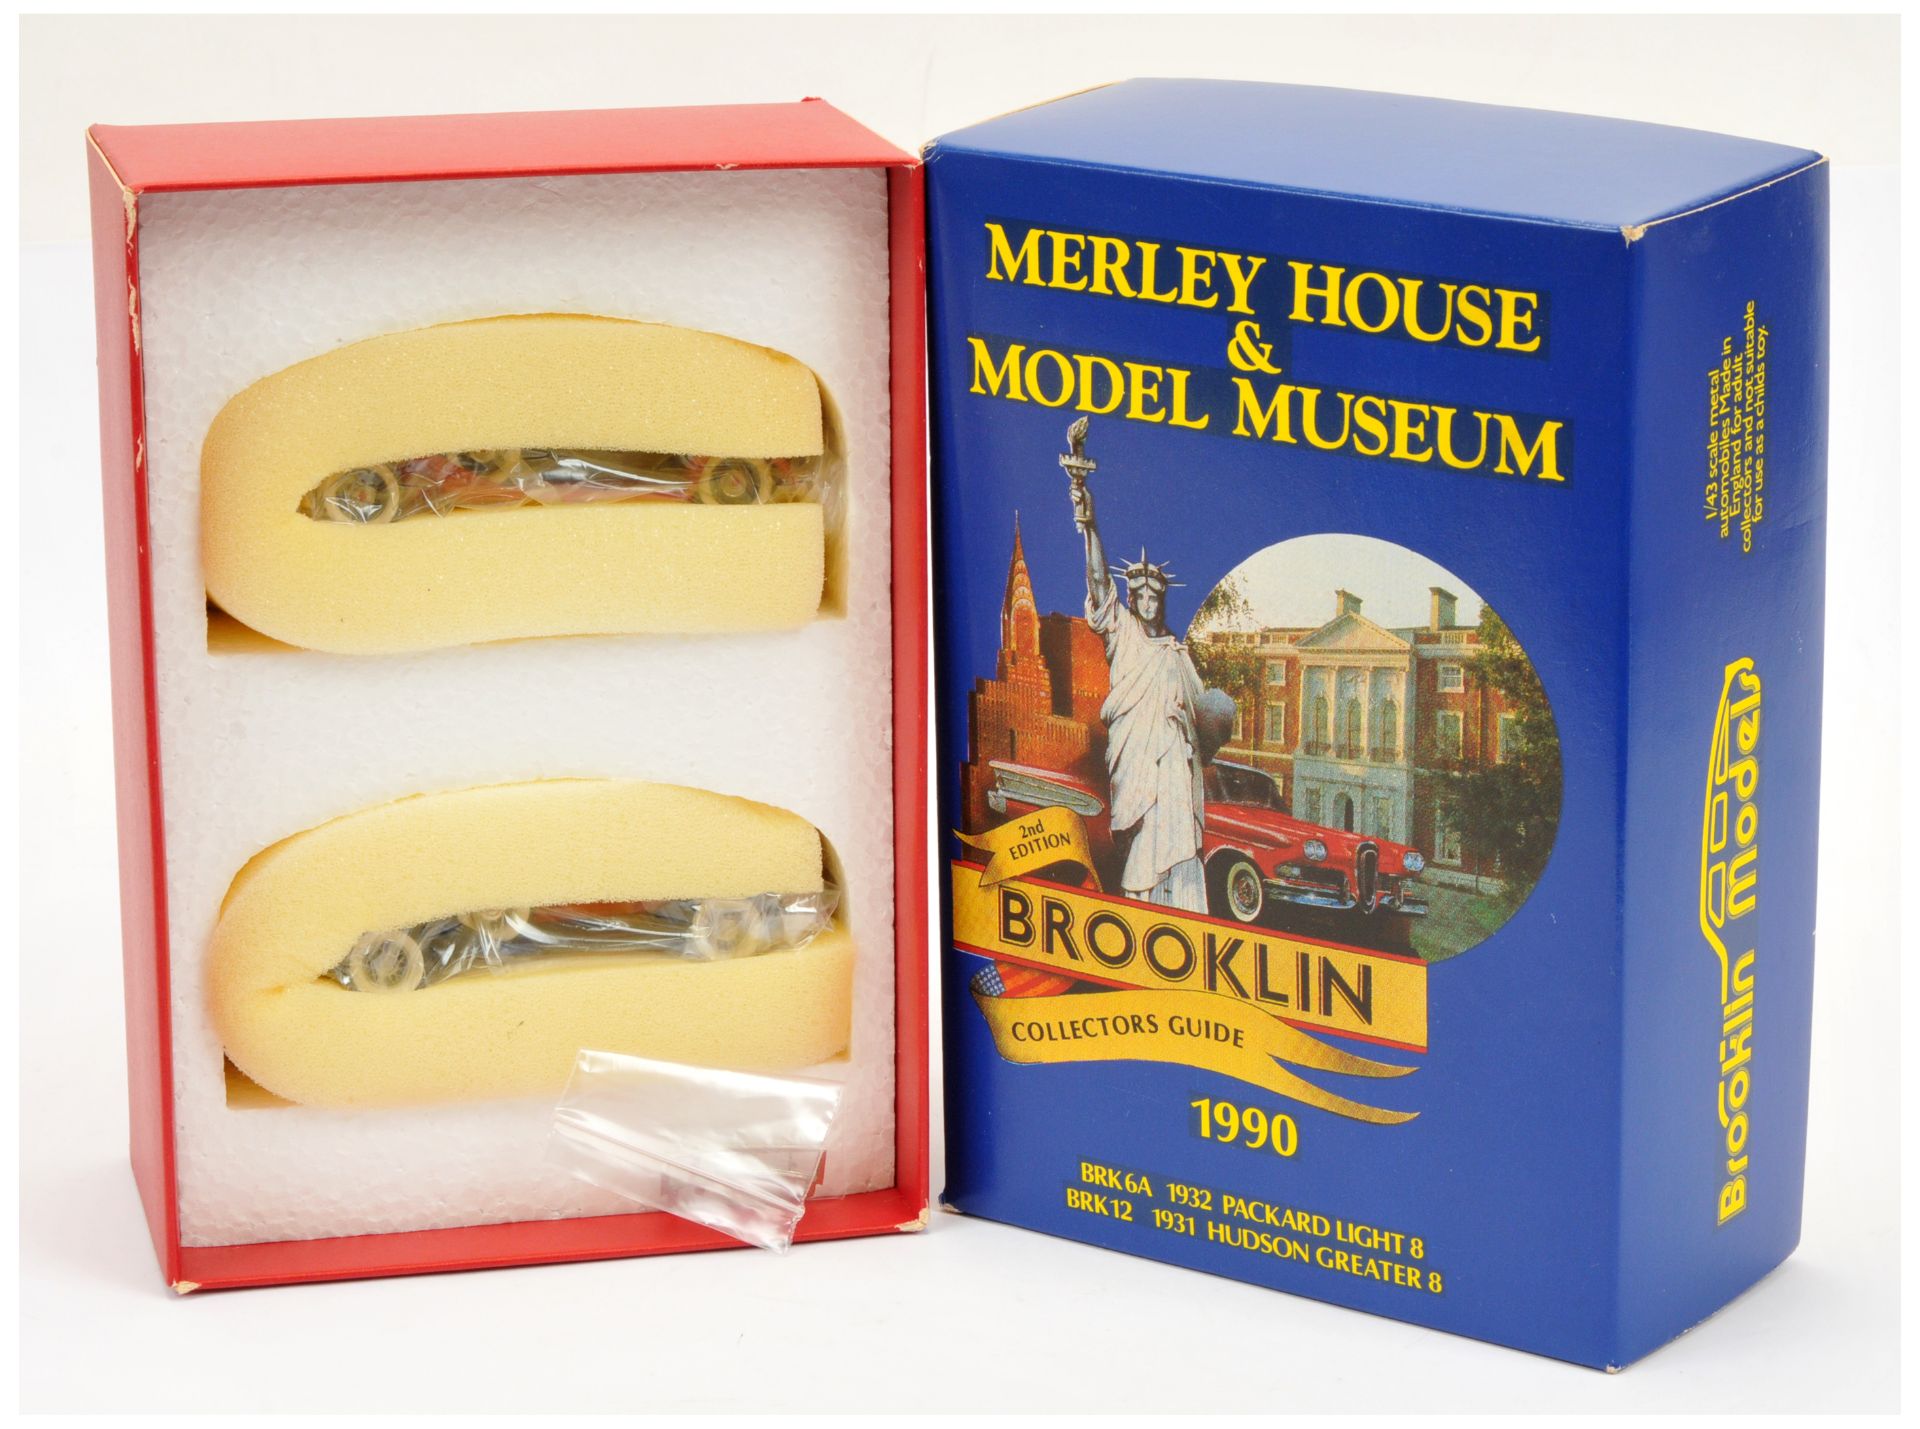 Brooklin Collectors Guide, 2nd Edition 990,Merley House & Model Museum